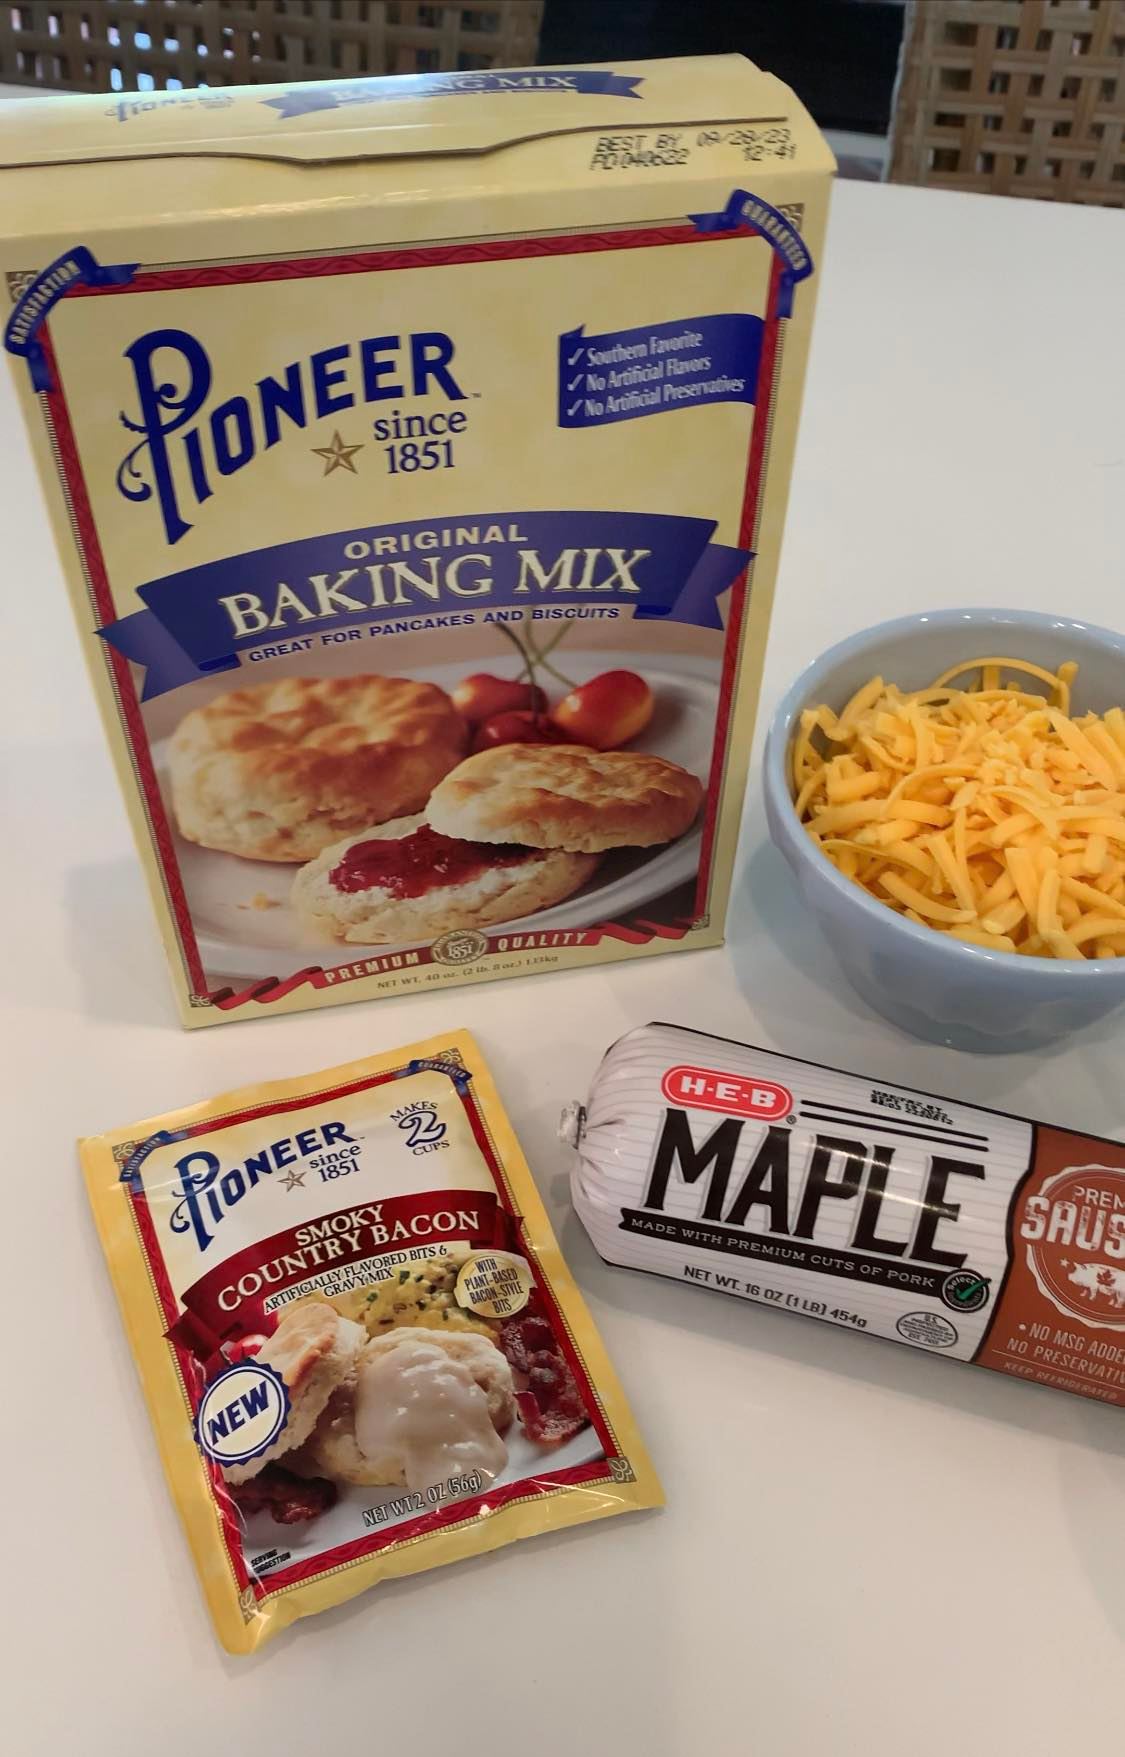 Pioneer baking mix, bowl of cheese, gravy packet, and sausage packet